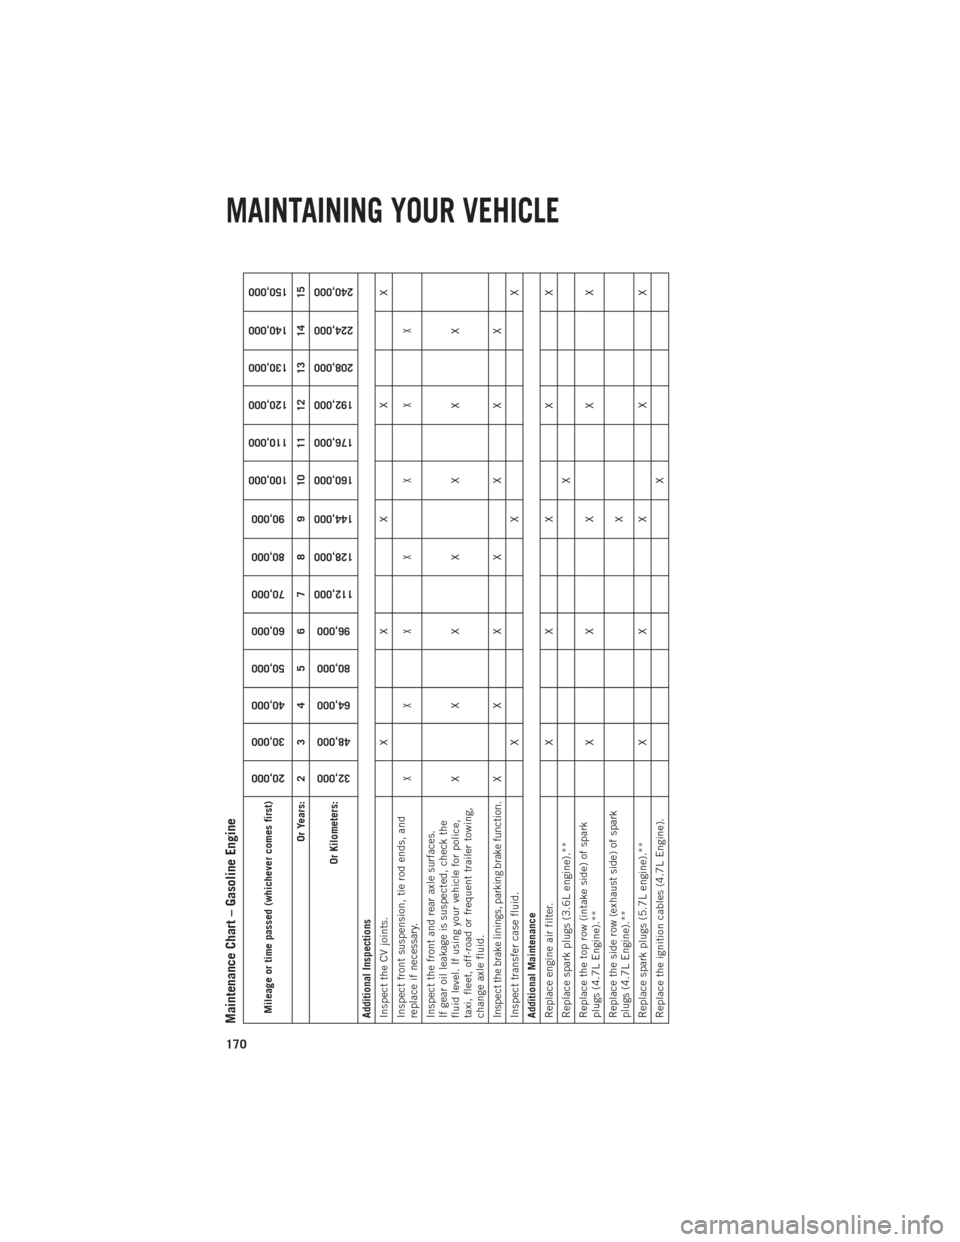 Ram 1500 2013  Get to Know Guide  Maintenance Chart – Gasoline EngineMileage or time passed (whichever comes first)
20,000
30,000
40,000
50,000
60,000
70,000
80,000
90,000
100,000
110,000
120,000
130,000
140,000
150,000
Or Years: 2 